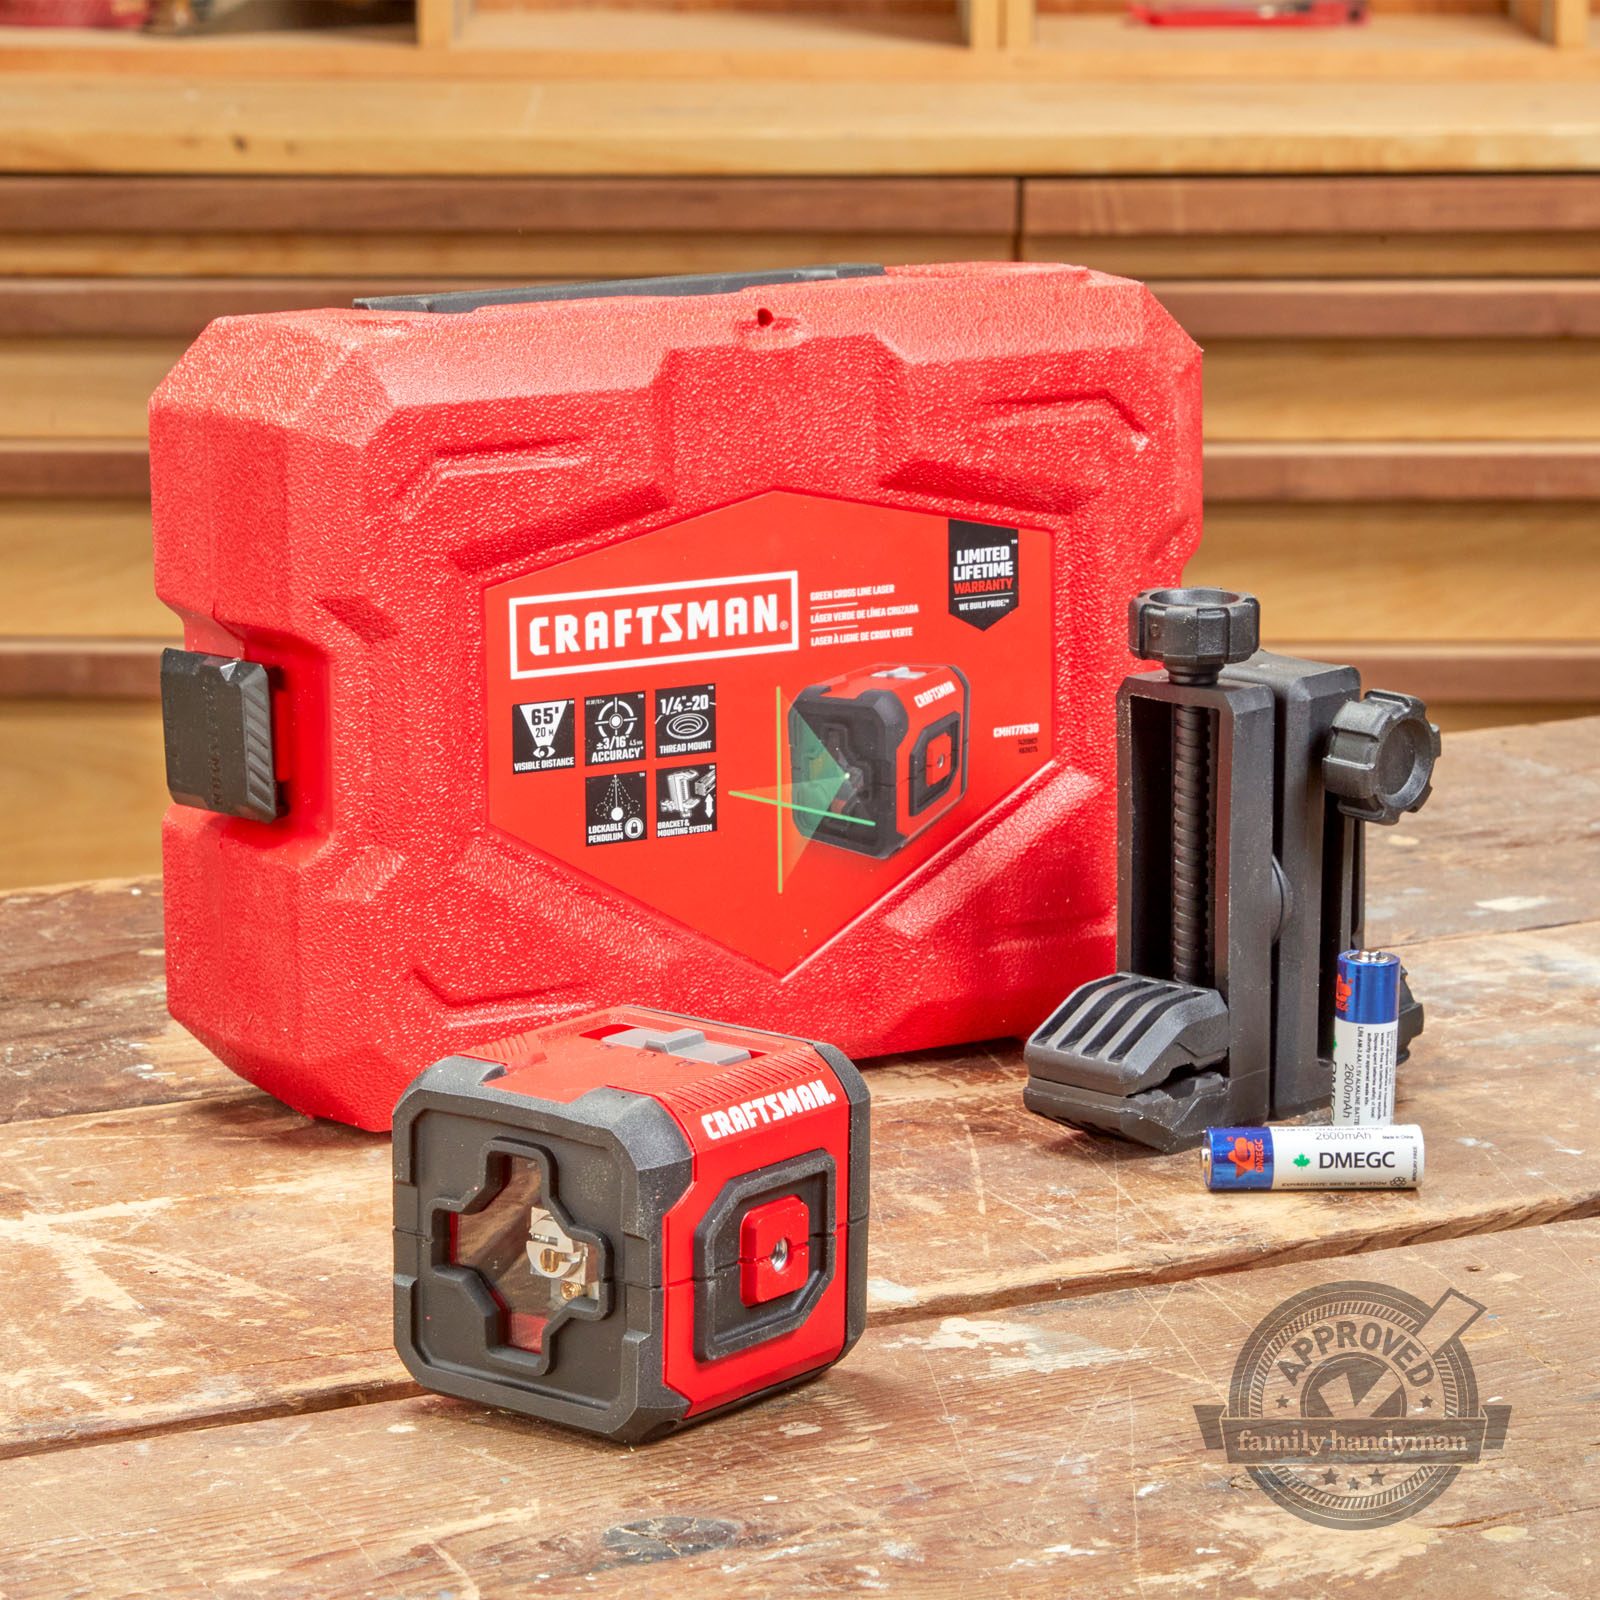 The Craftsman Crossline Laser Level Is Family Handyman Approved